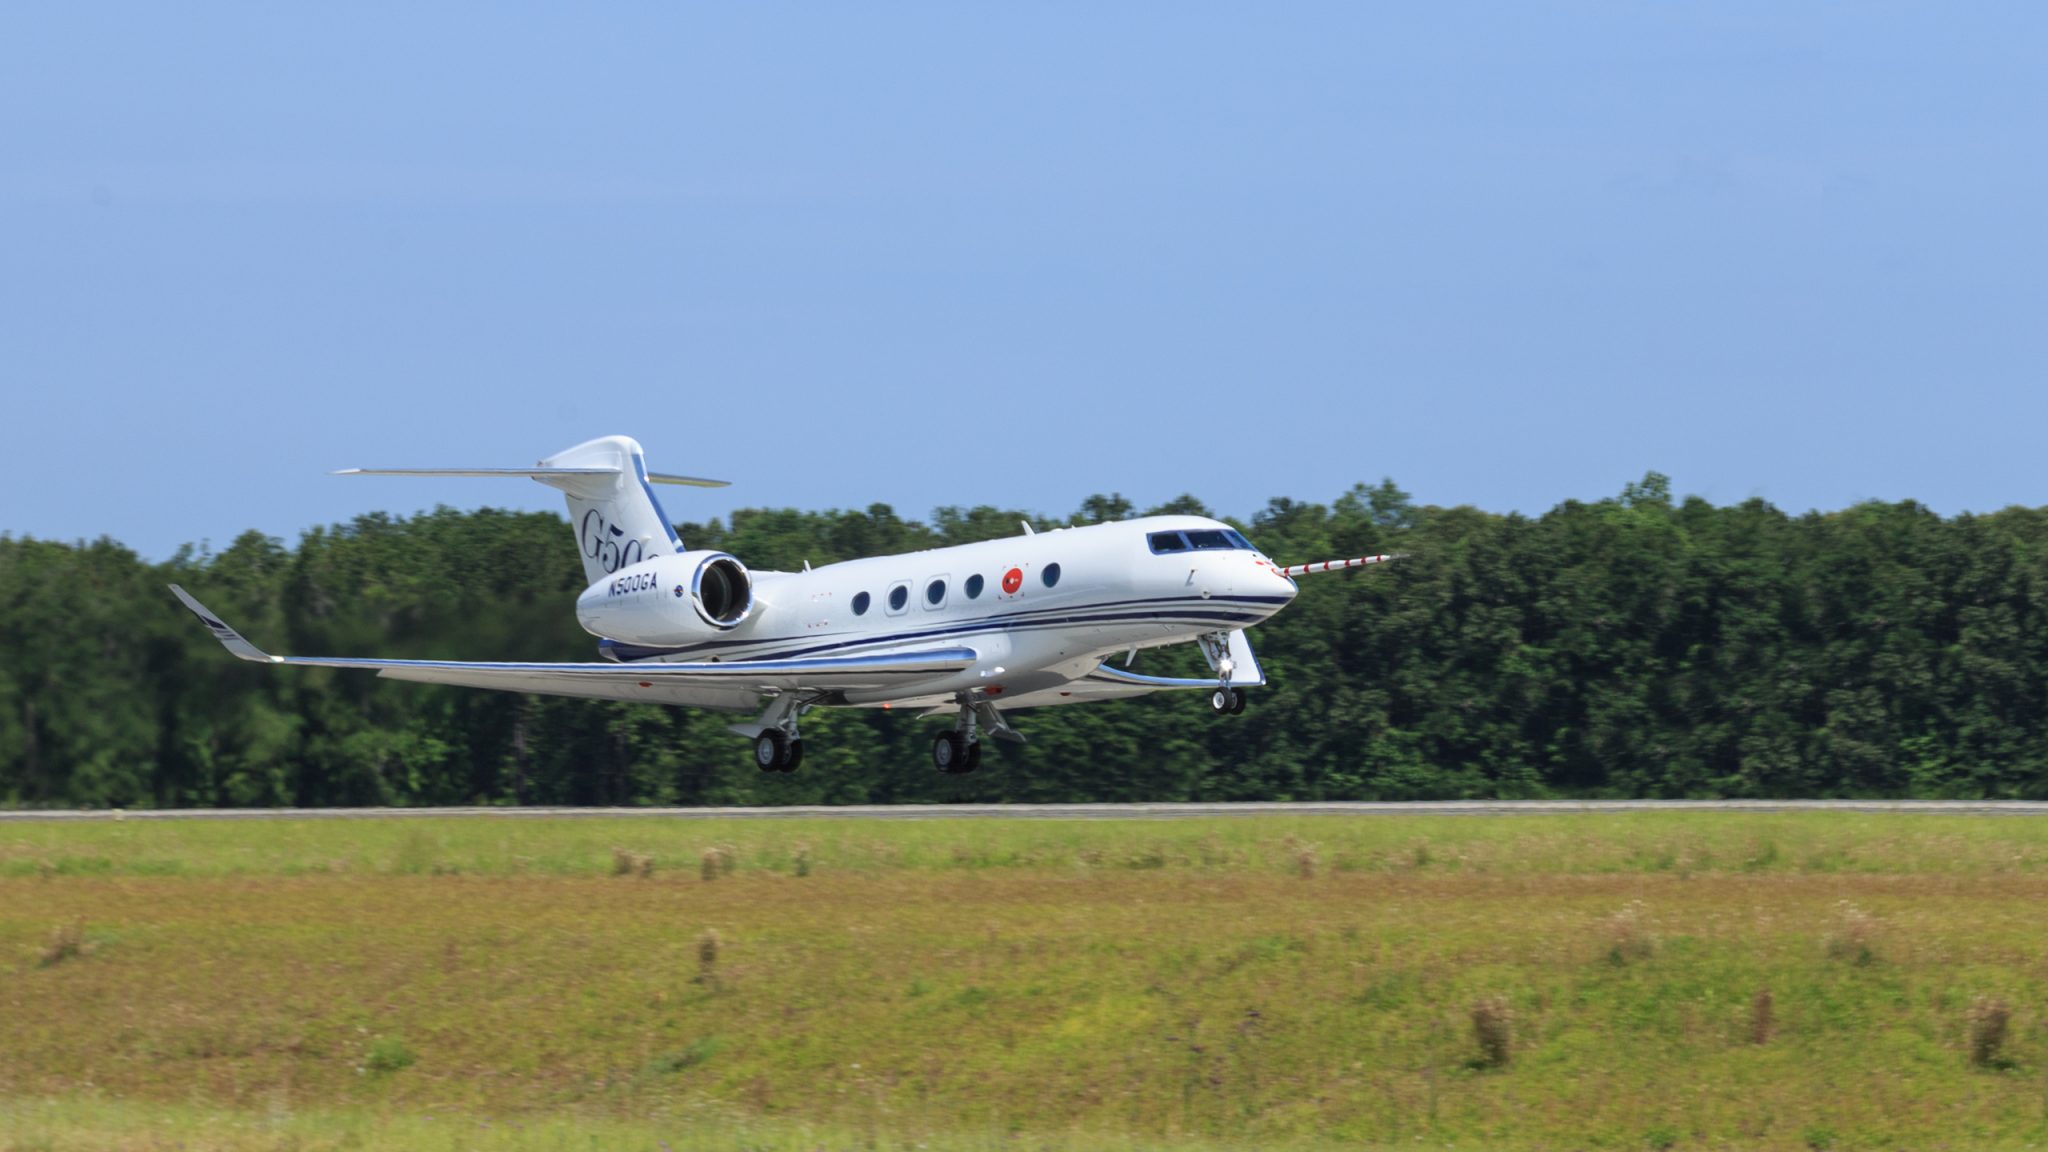 The Gulfstream G500 takes off on its first flight.